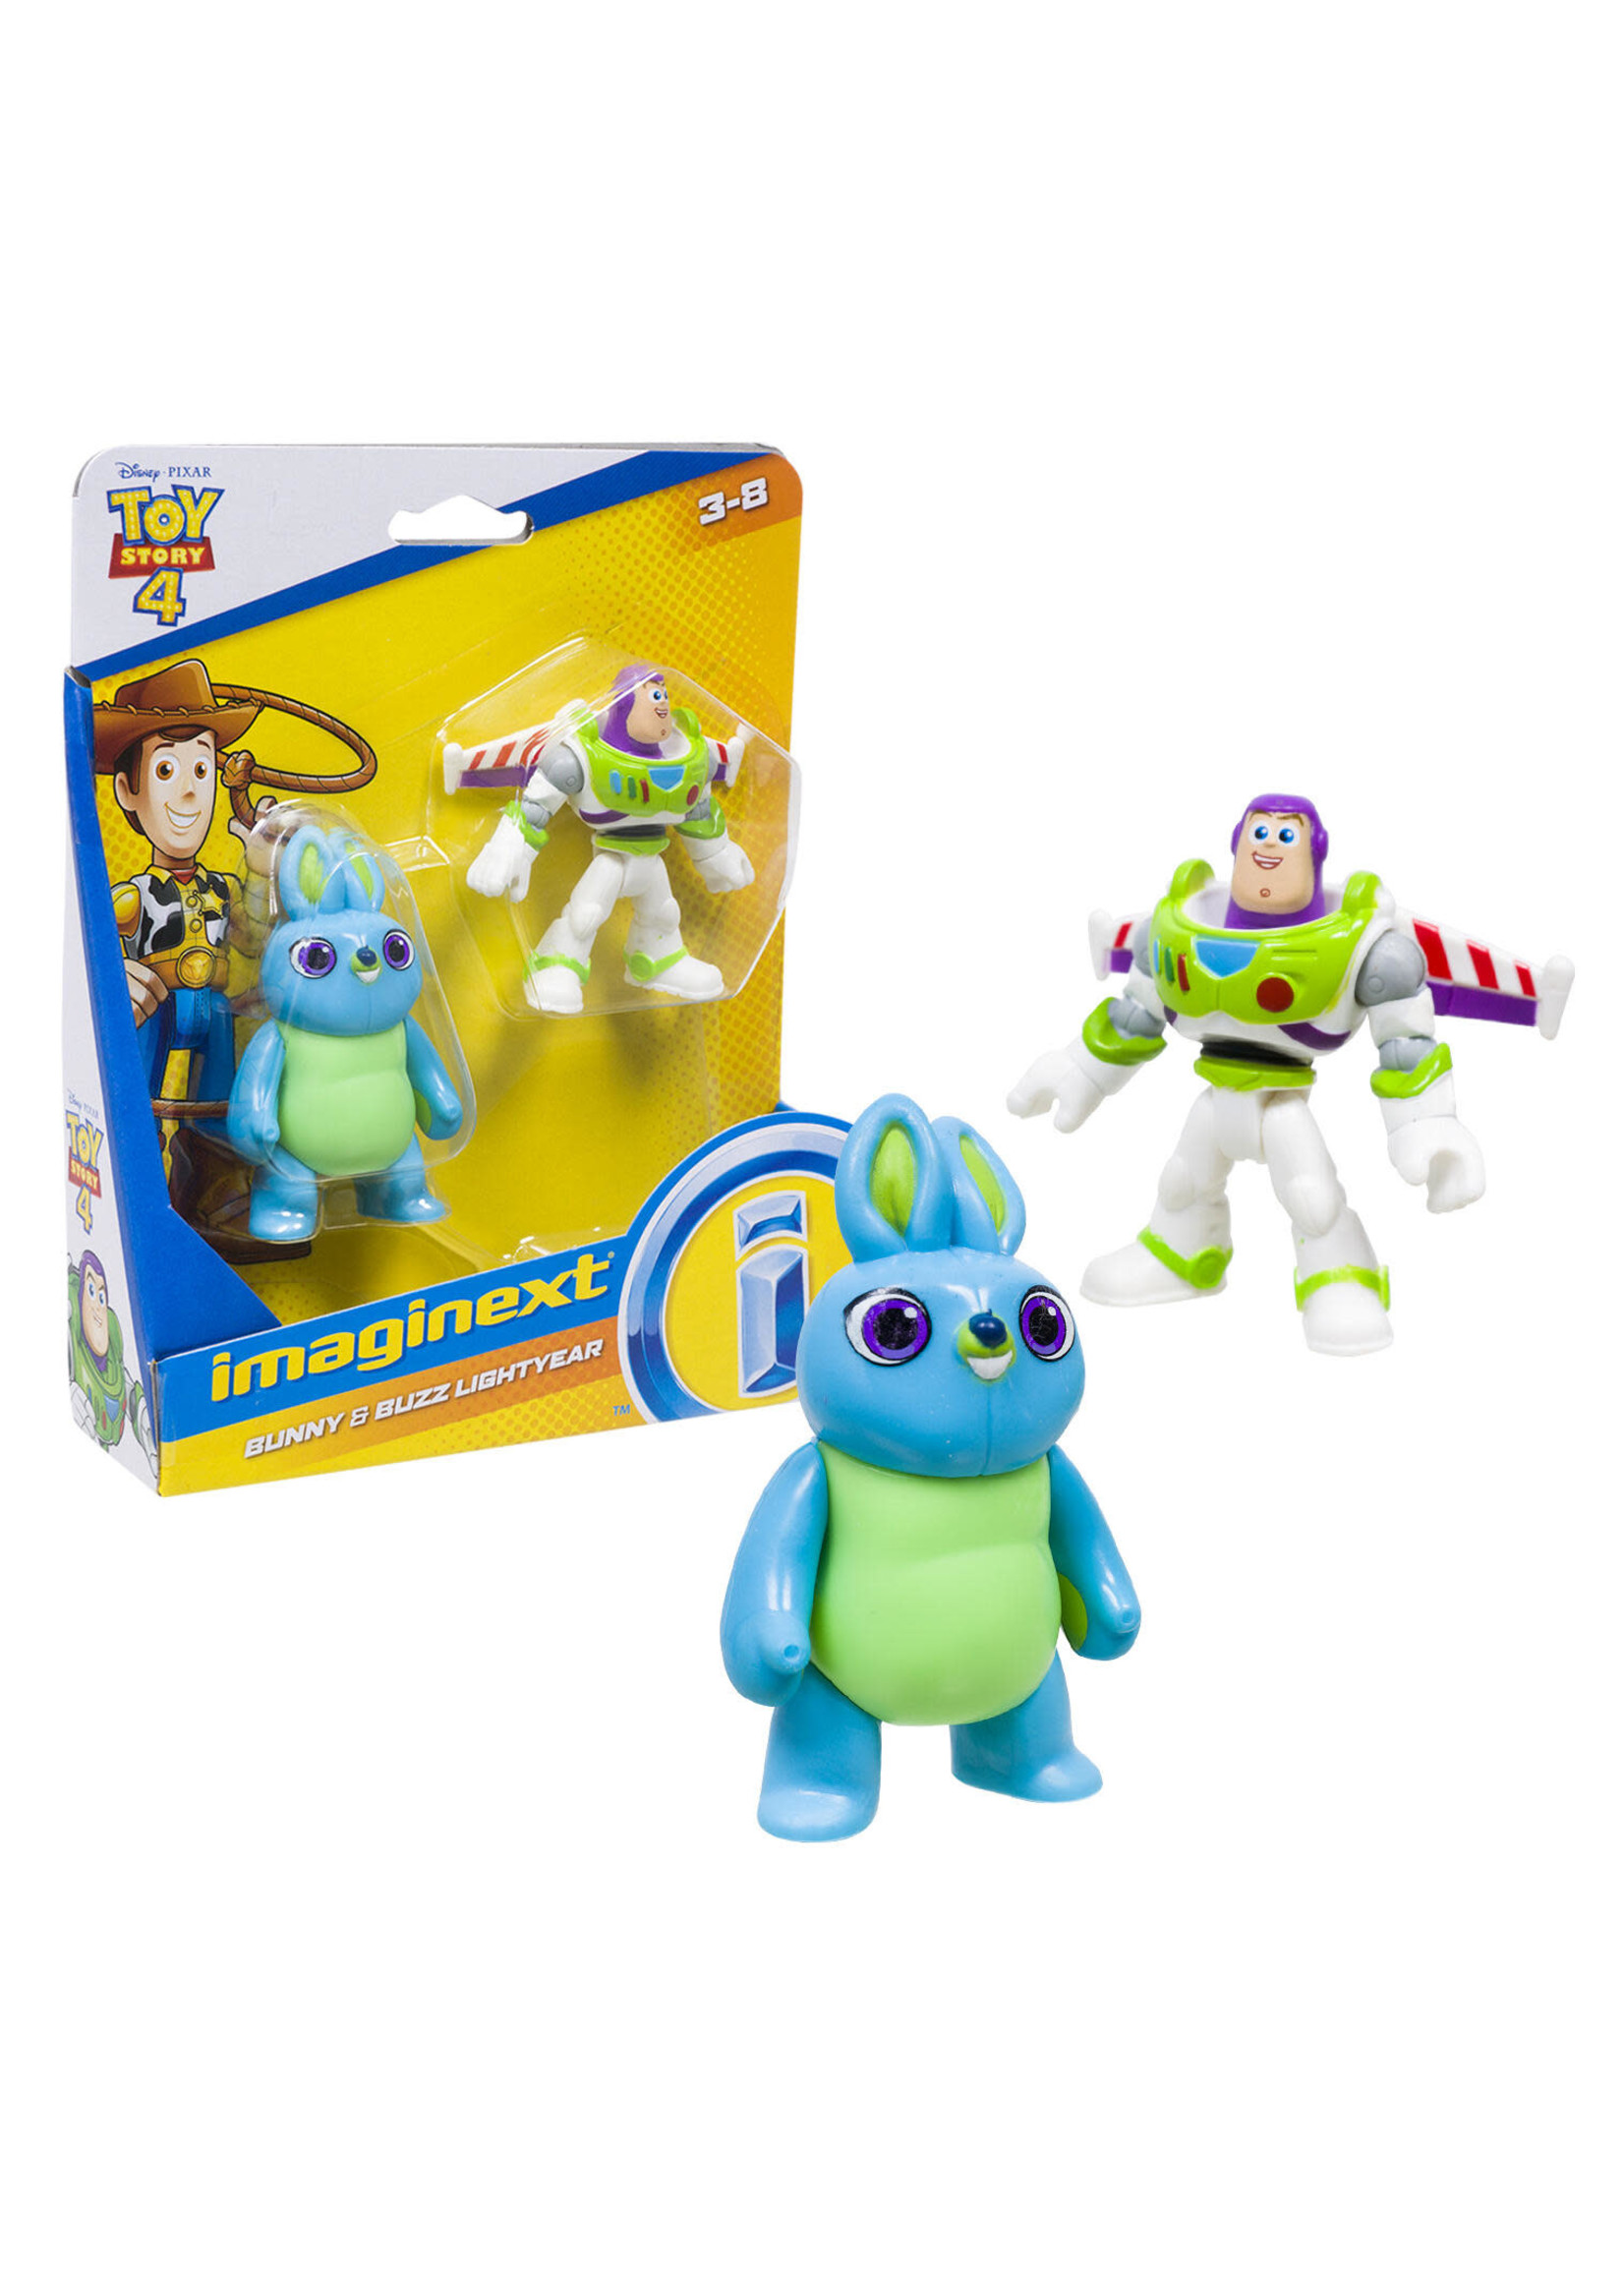 Fisher Price Imaginext - Toy story 4